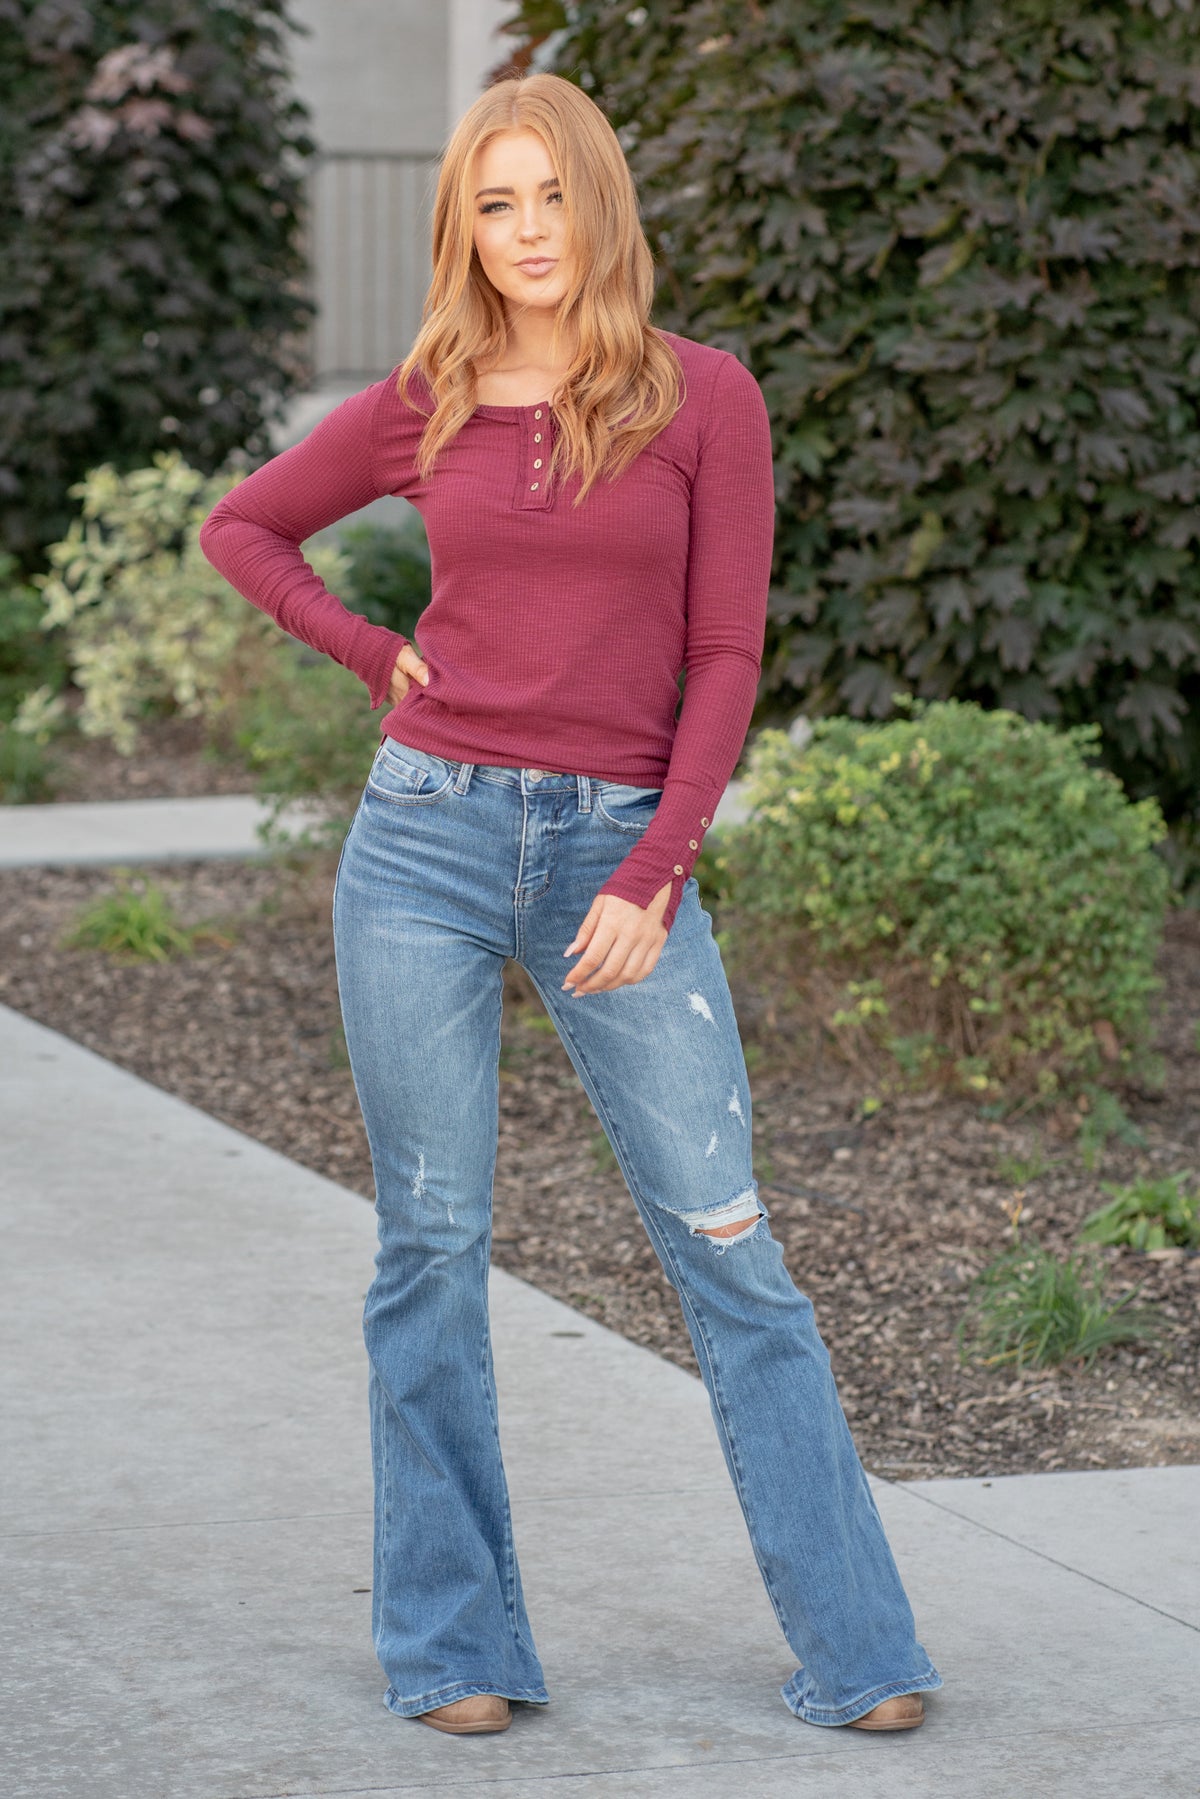 VERVET by Flying Monkey Jeans  This flare features a high rise with single button closure and a 34" inseam for length.  Flare, 34" Inseam*  Rise: High Rise, 10" Front Rise* Leg Opening: 26"* 98% Cotton, 2% Spandex Stitching: Classic  Fly: Zip Fly  Style #: V2813 Contact us for any additional measurements or sizing.   *Measured on the smallest size, measurements may vary by size.